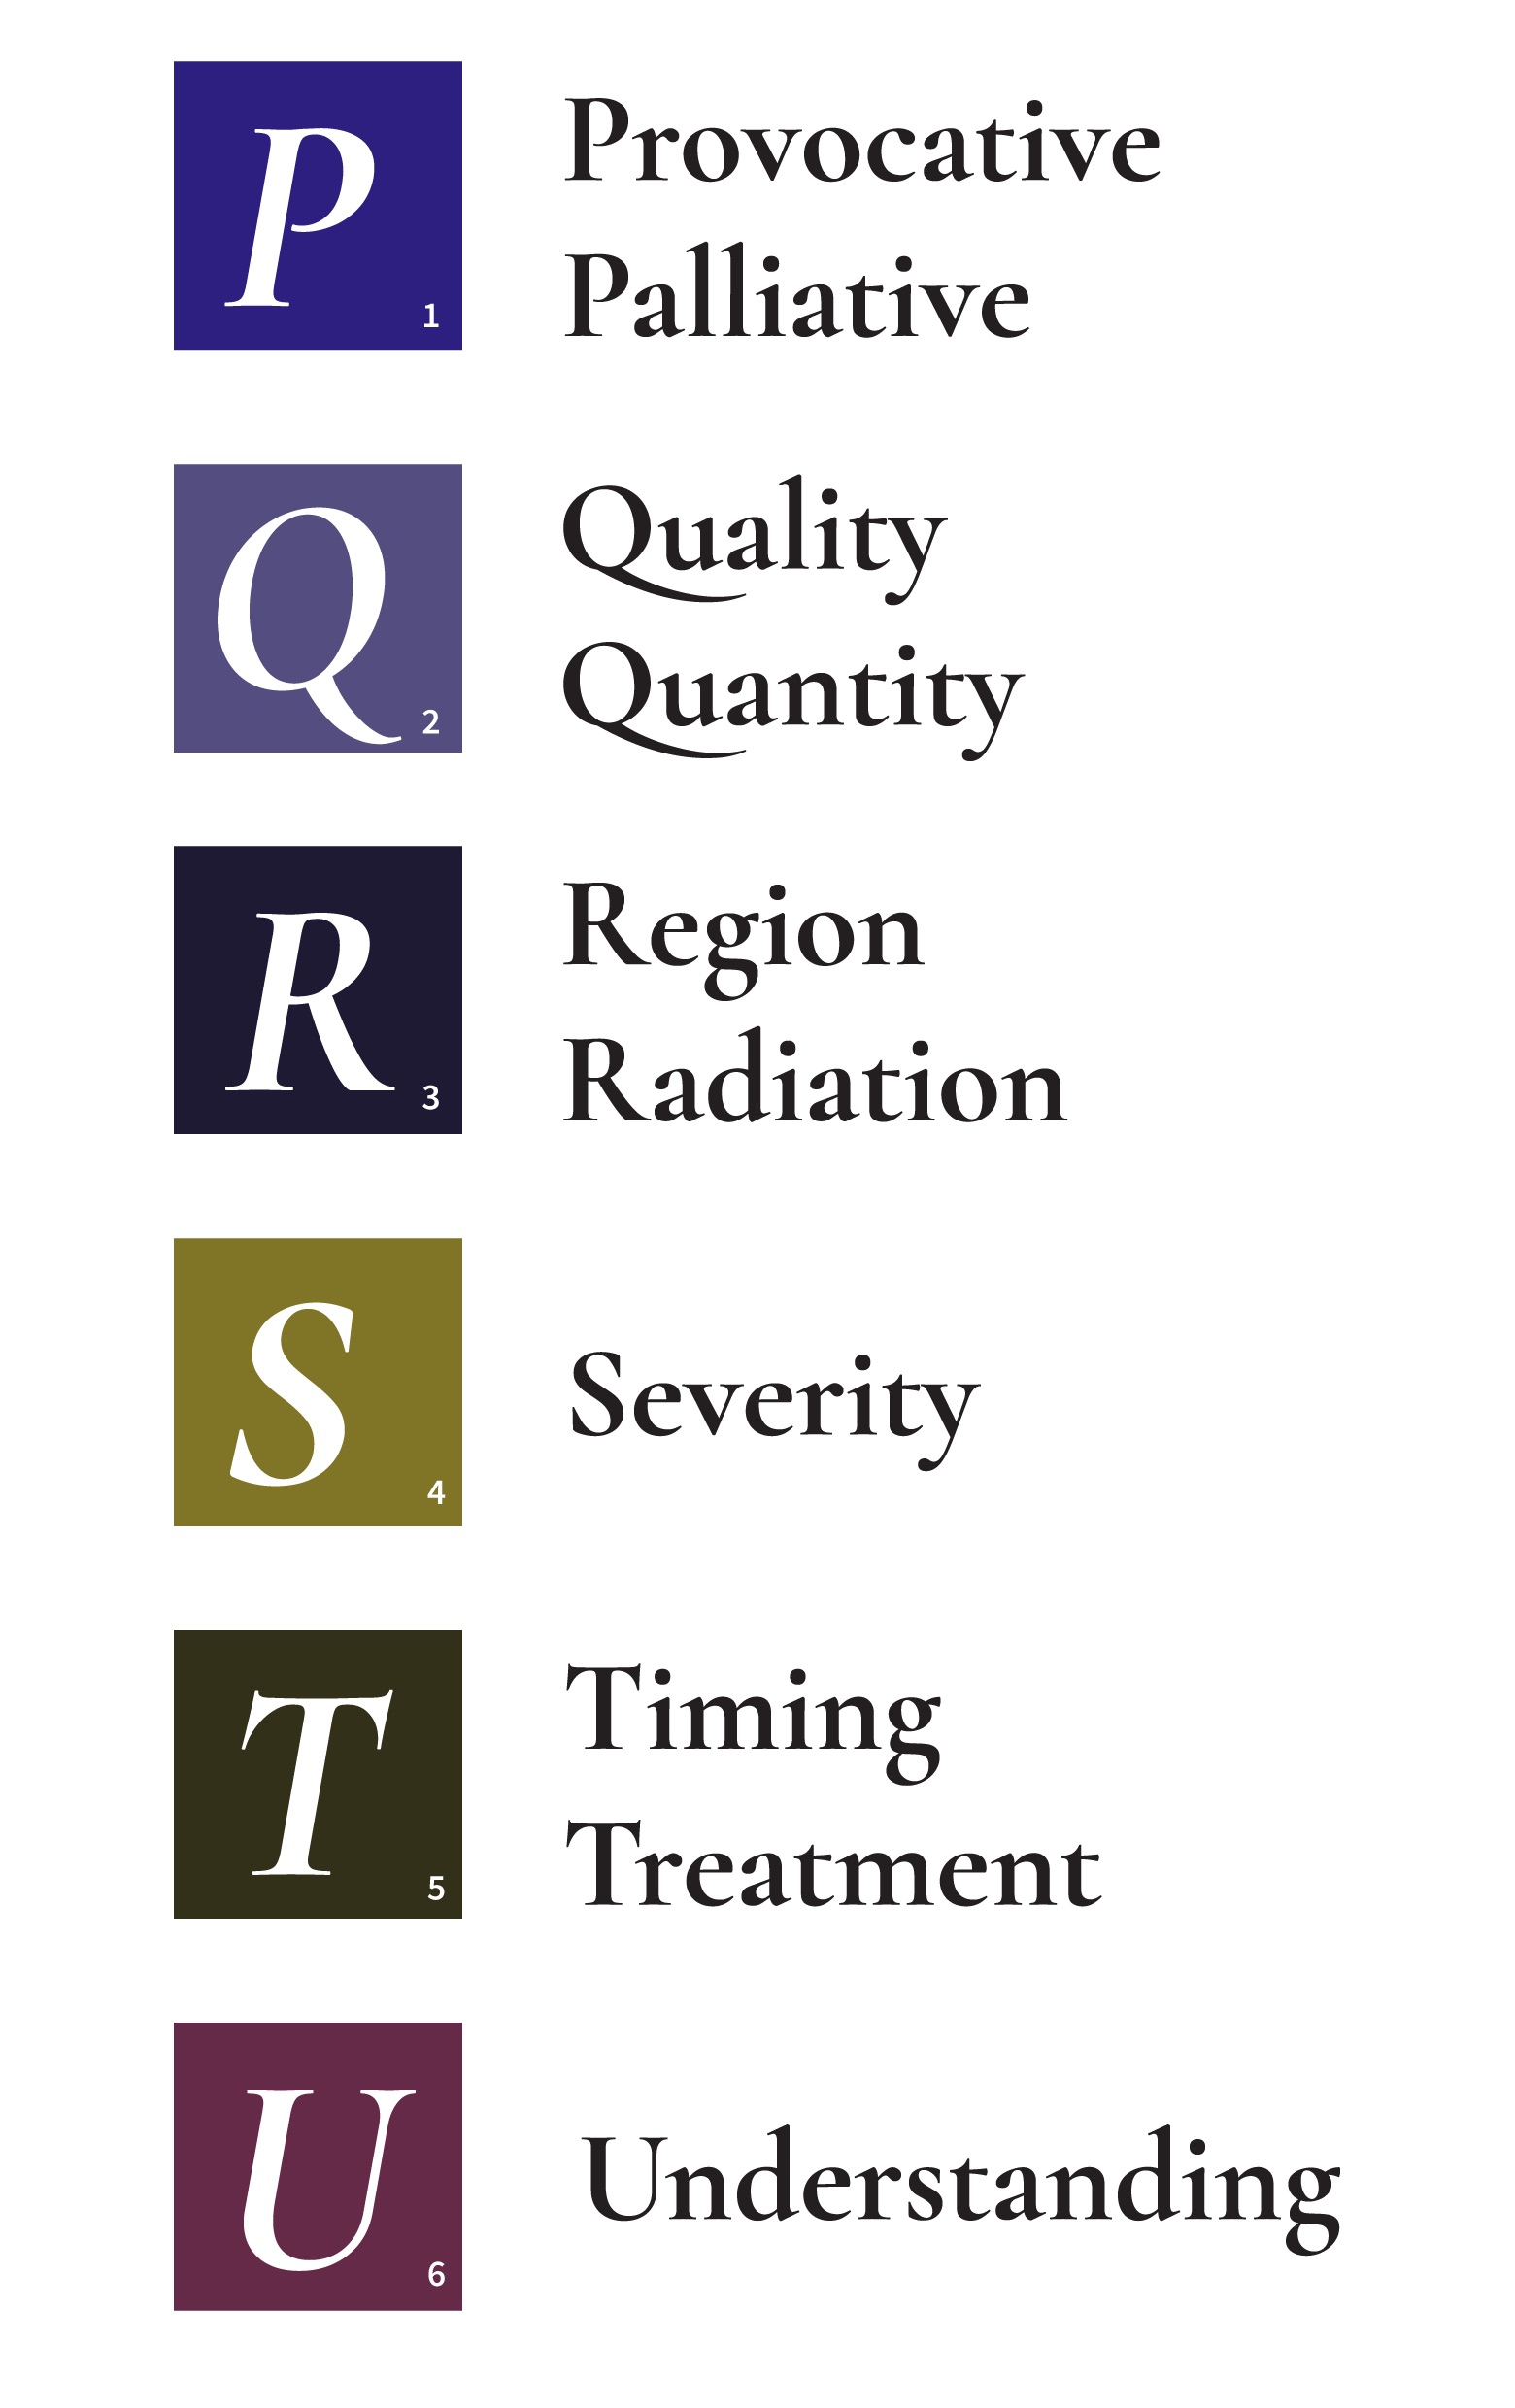 P Q R S T U presented vertically. The words Provocative and Palliative are beside the P, Quality and Quantity beside the Q, Region and Radiation beside the R, Severity beside the S, Timing and Treatment beside the T, and Understanding beside the U.